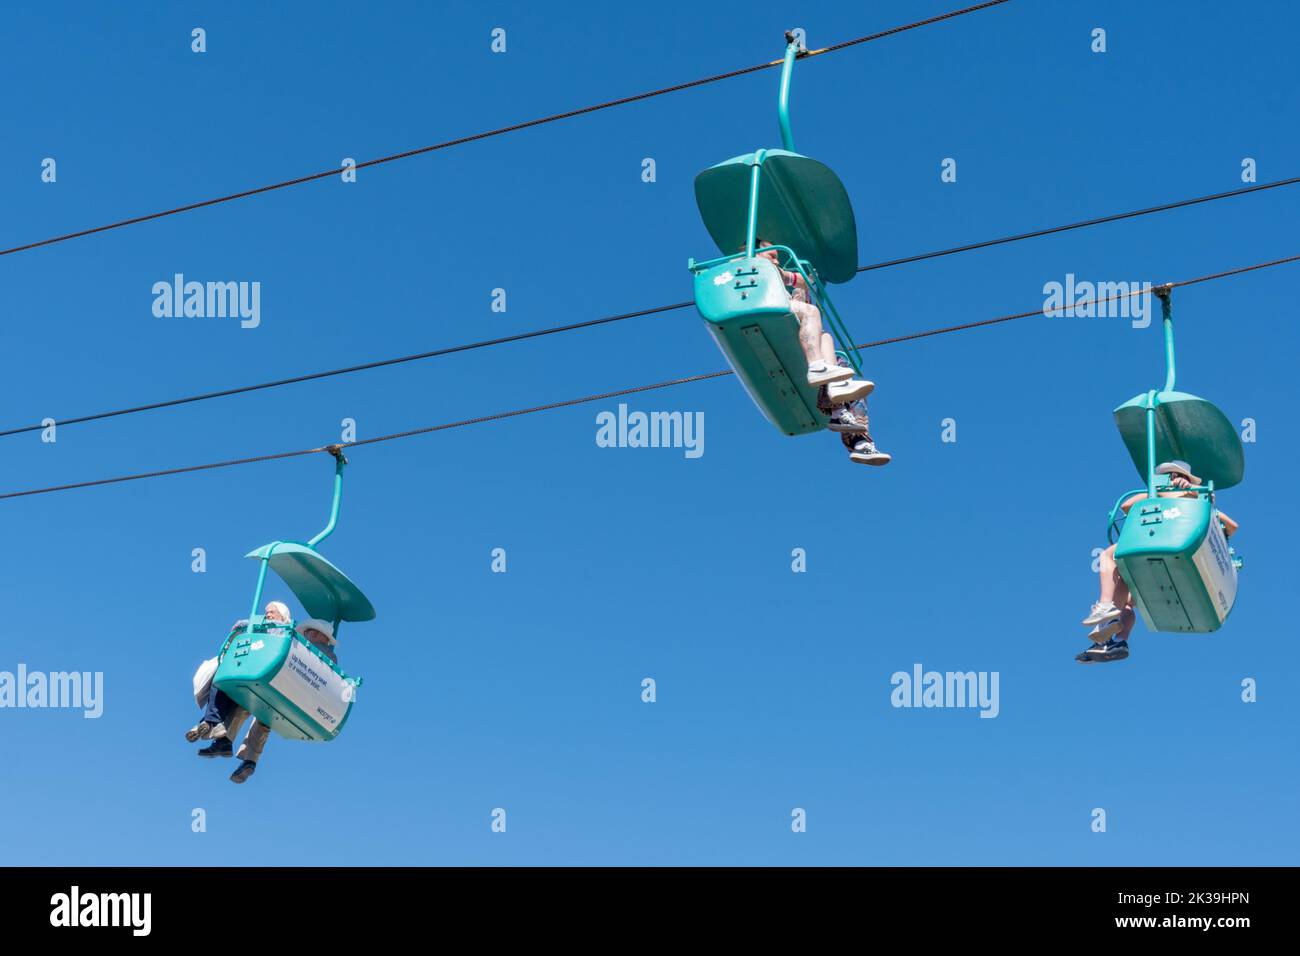 Calgary, Alberta, Canada - July 15, 2022: People enjoy the Calgary Stampede at the Stampede Park, from the sky ride chairs Stock Photo